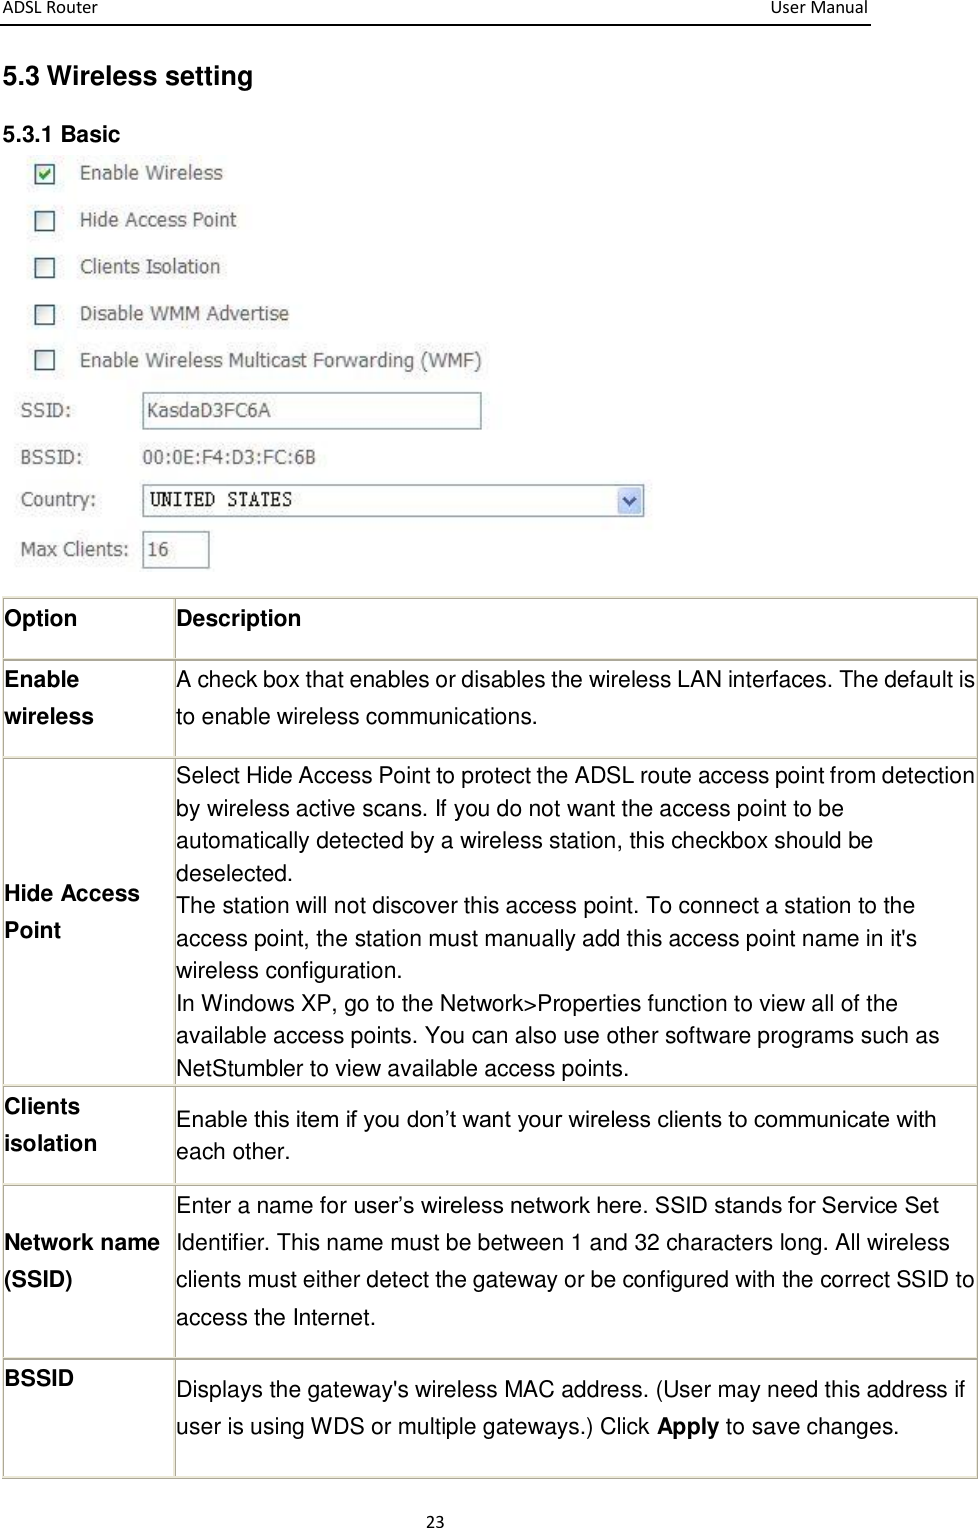 ADSL Router       User Manual 23 5.3 Wireless setting 5.3.1 Basic  Option Description Enable wireless   A check box that enables or disables the wireless LAN interfaces. The default is to enable wireless communications. Hide Access Point Select Hide Access Point to protect the ADSL route access point from detection by wireless active scans. If you do not want the access point to be automatically detected by a wireless station, this checkbox should be deselected. The station will not discover this access point. To connect a station to the access point, the station must manually add this access point name in it&apos;s wireless configuration. In Windows XP, go to the Network&gt;Properties function to view all of the available access points. You can also use other software programs such as NetStumbler to view available access points. Clients isolation Enable this item if you don’t want your wireless clients to communicate with each other. Network name (SSID) Enter a name for user’s wireless network here. SSID stands for Service Set Identifier. This name must be between 1 and 32 characters long. All wireless clients must either detect the gateway or be configured with the correct SSID to access the Internet. BSSID  Displays the gateway&apos;s wireless MAC address. (User may need this address if user is using WDS or multiple gateways.) Click Apply to save changes. 